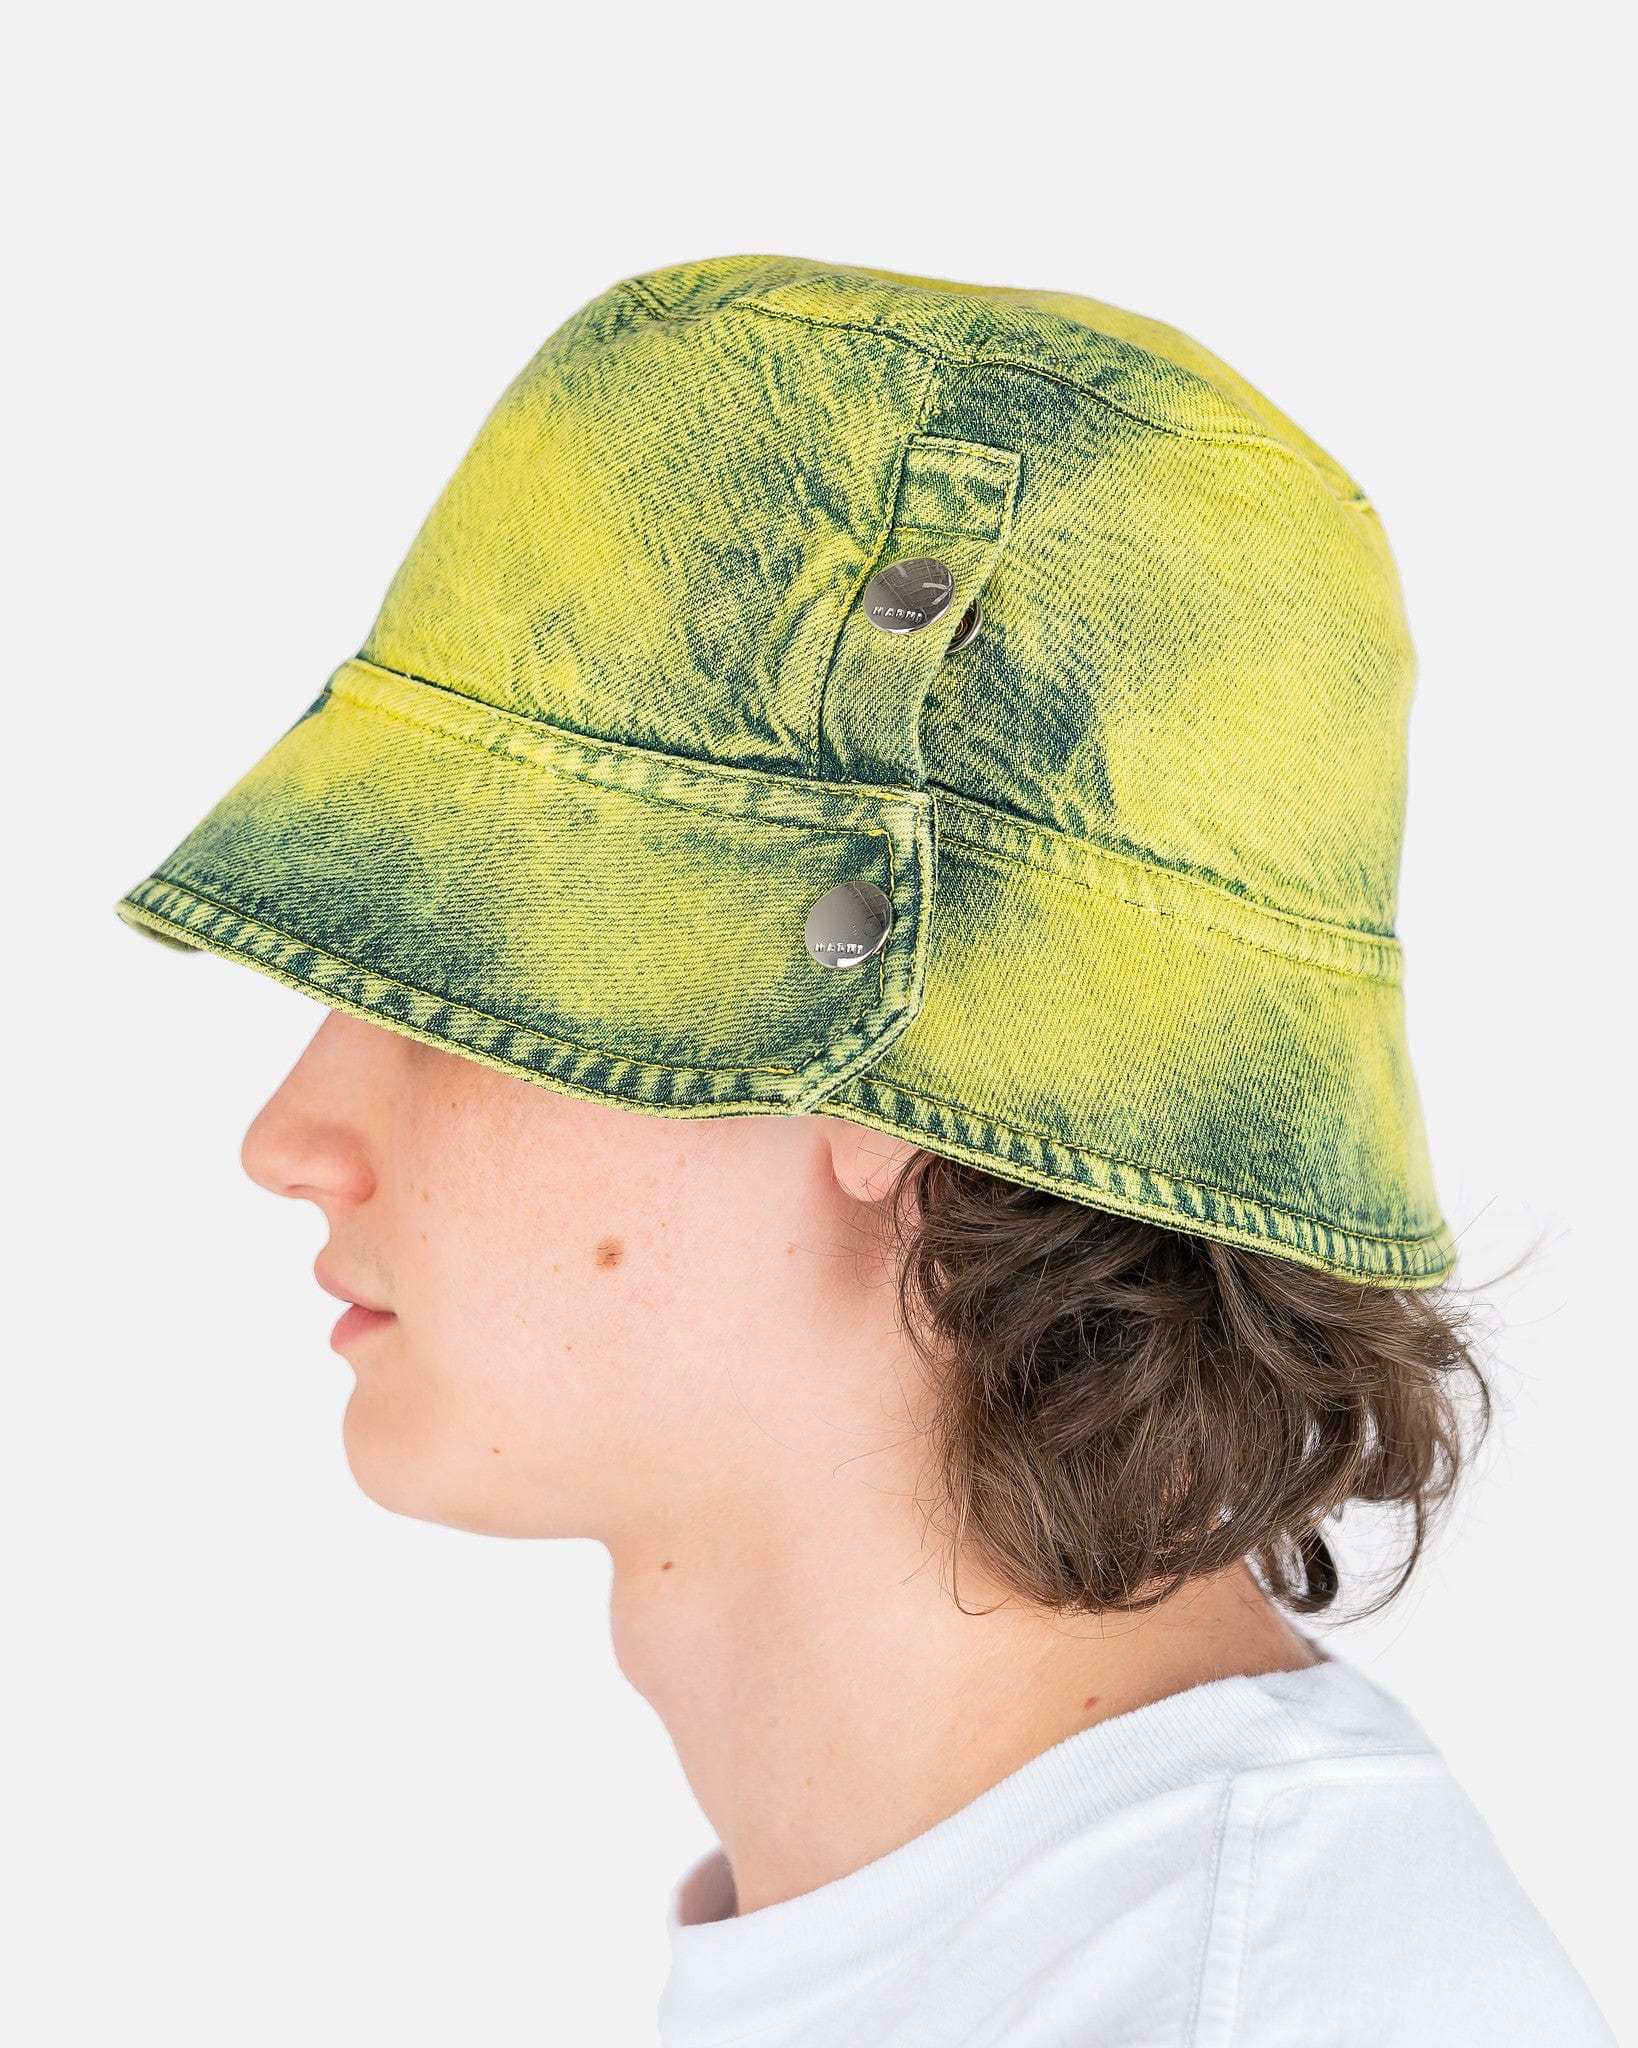 Marni Men's Hats Fisherman Hat in Curry